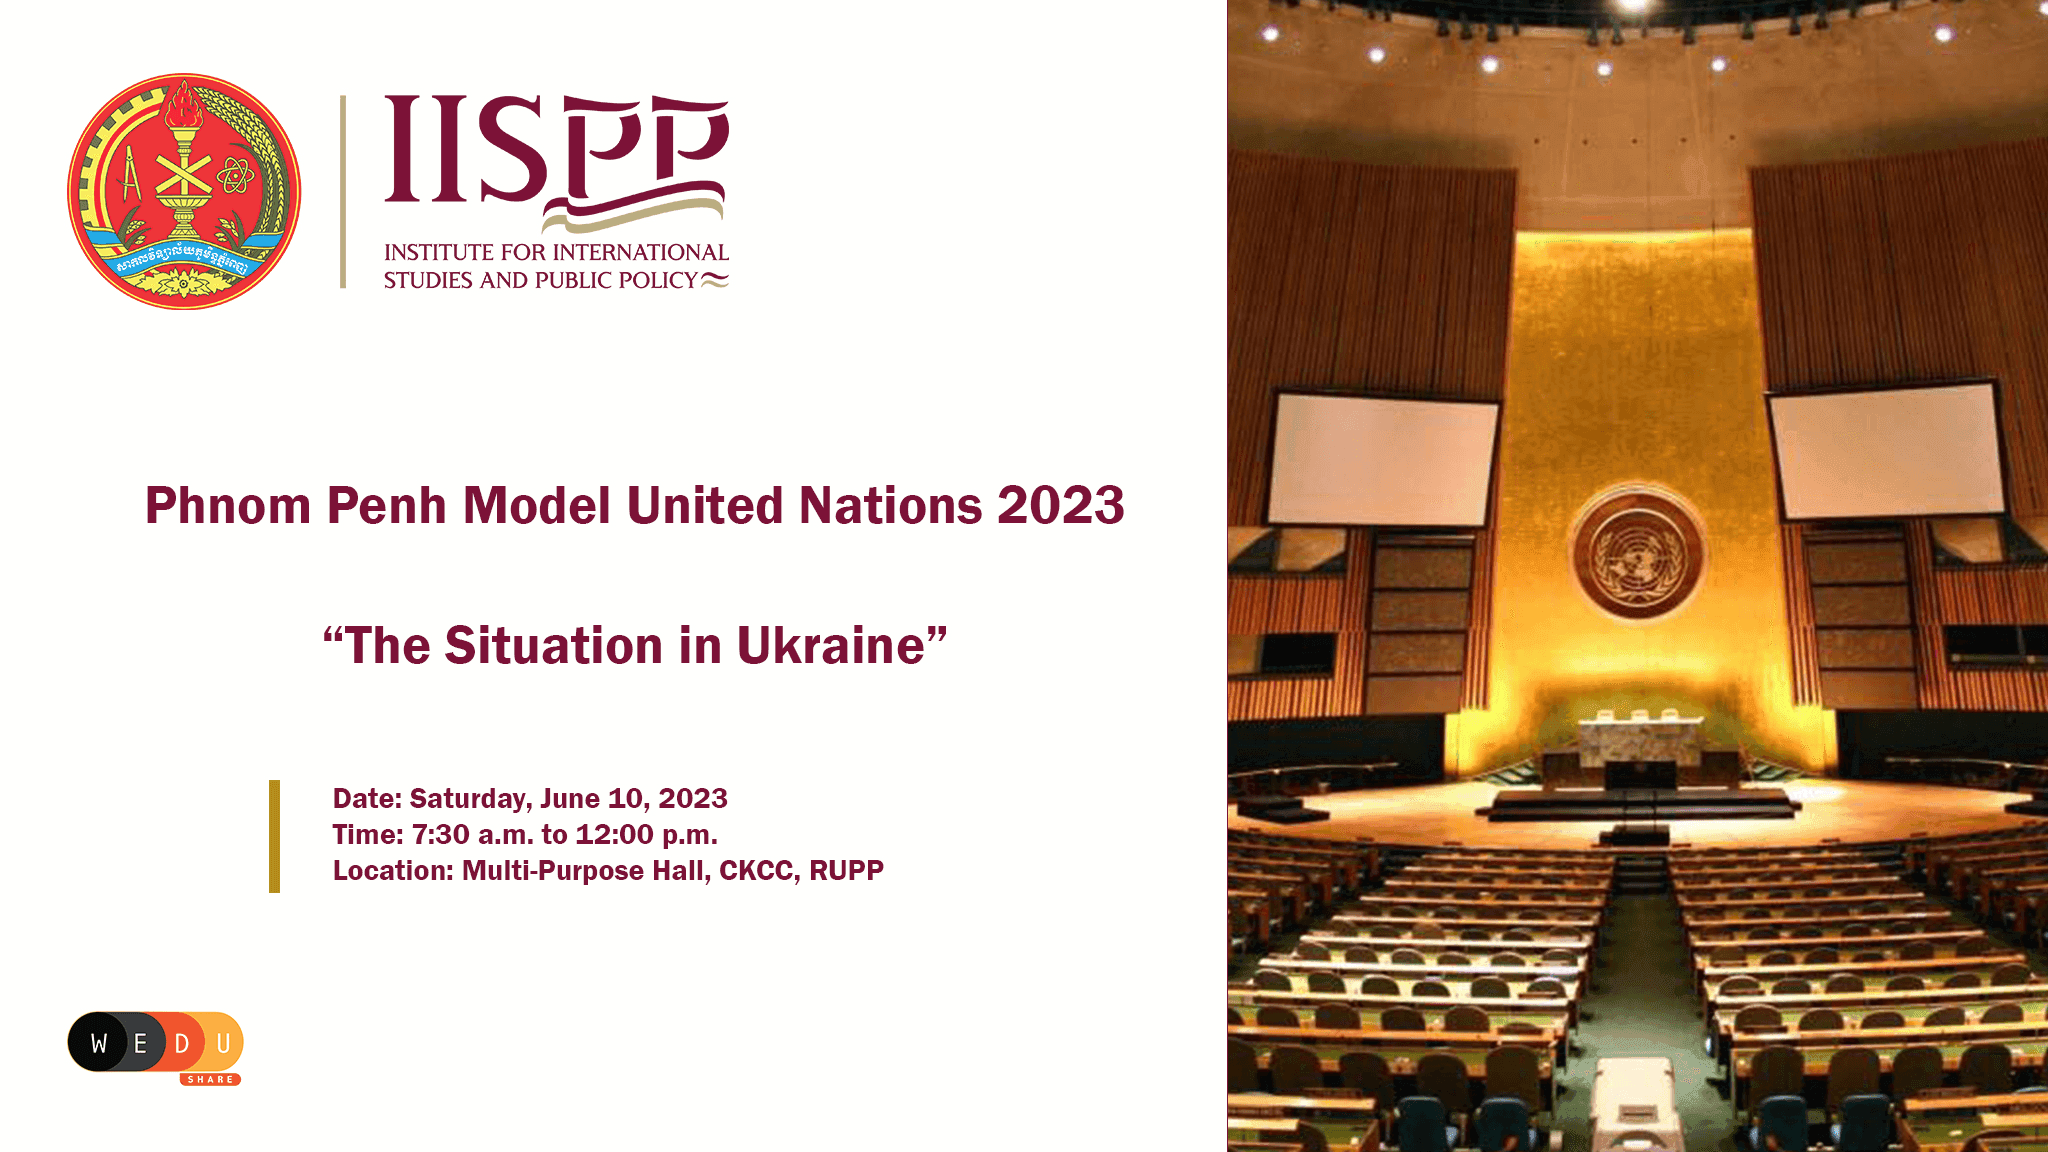 Phnom Penh Model United Nations 2023 - The Situation in Ukraine